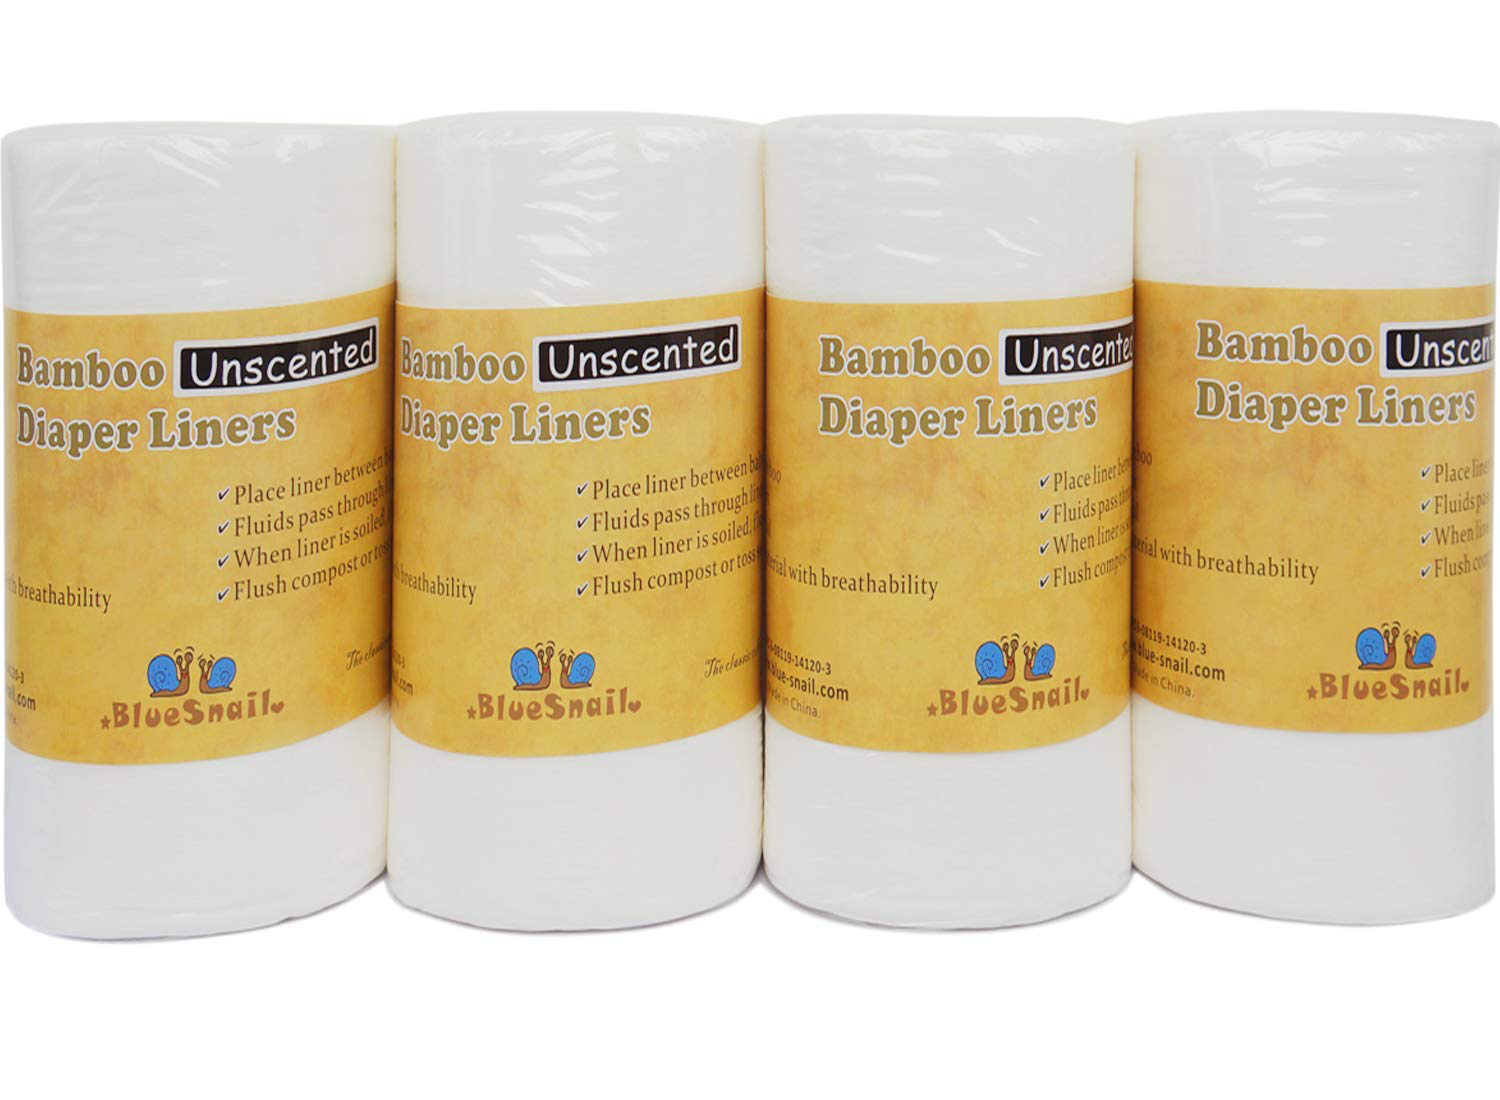 Bamboo Unscent Diaper Liners- Fragance Free and Chlorine Free(4Pk) 400 Count by Bluesnail